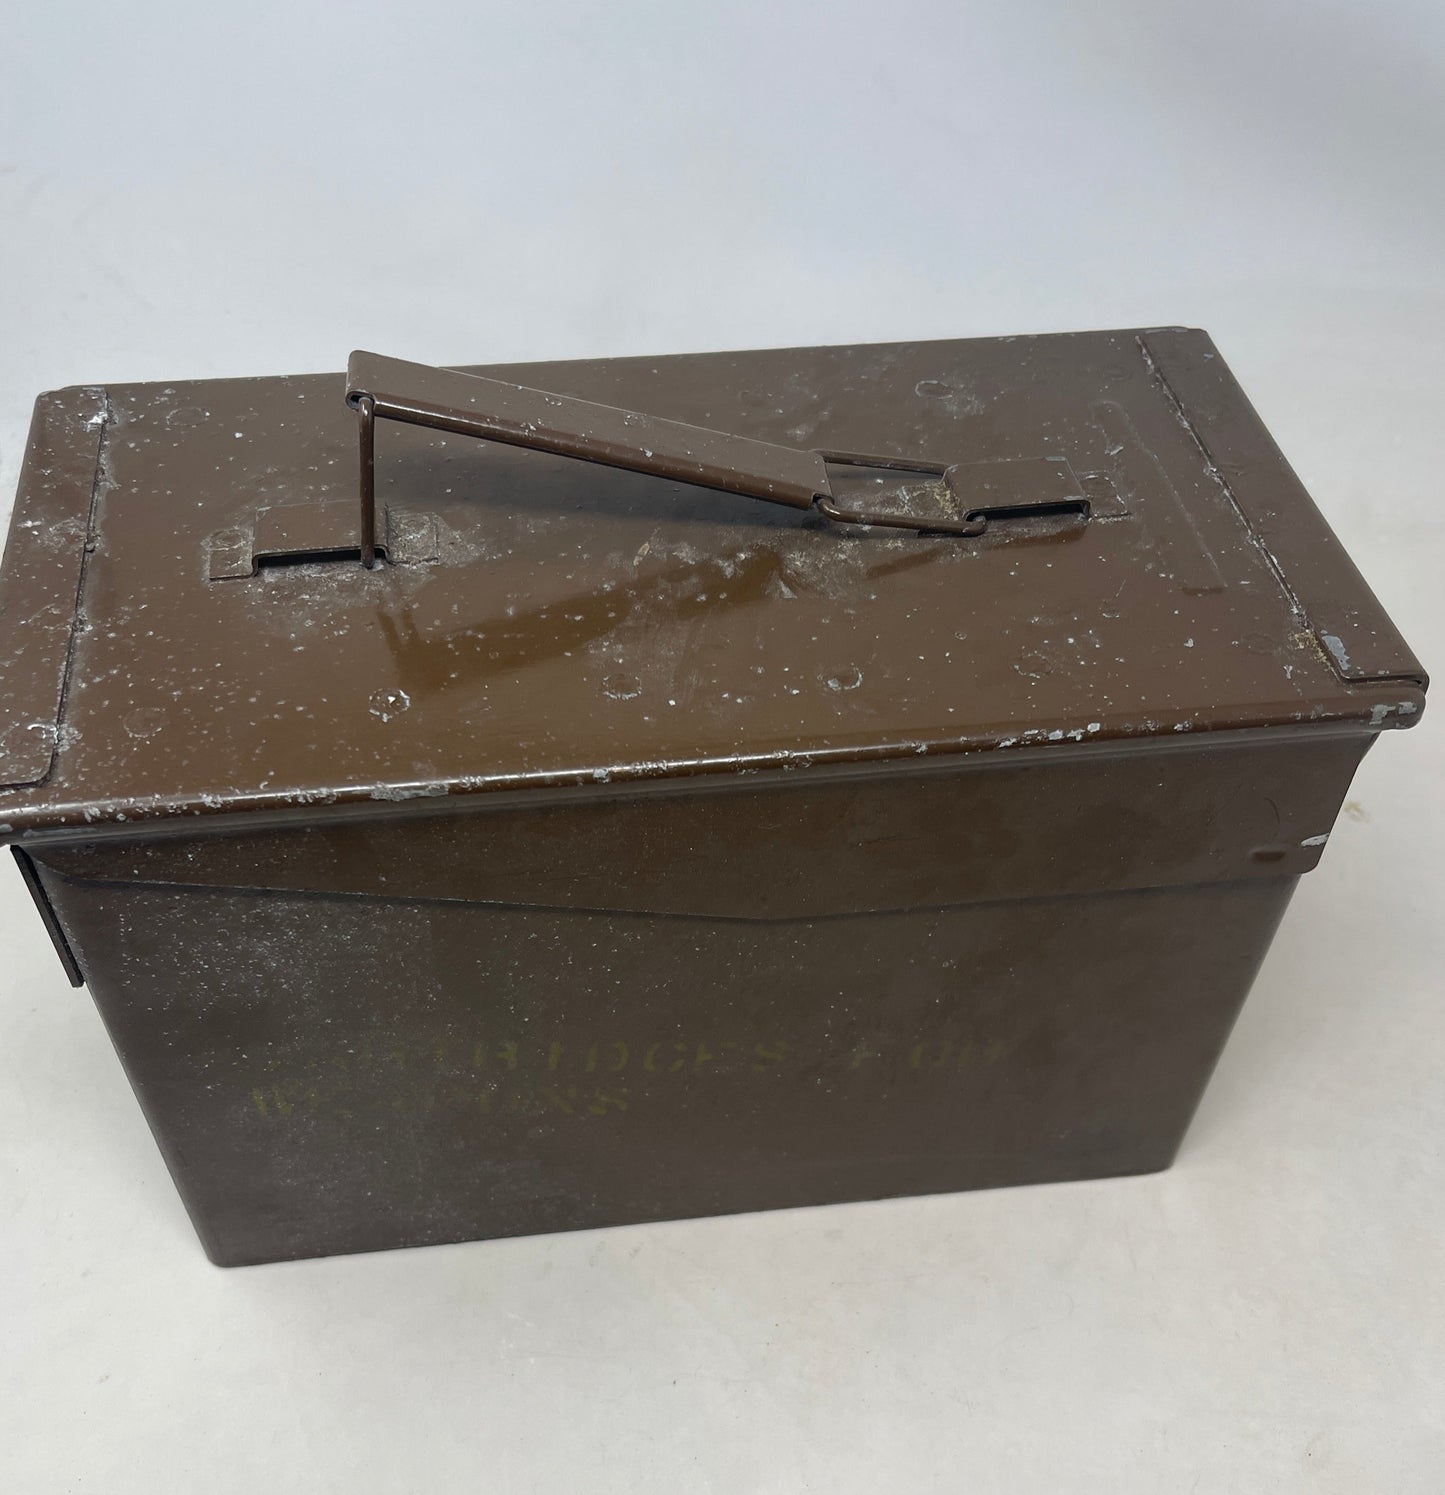 British H83 Ammunition Box for 5.56mm in Bandoliers